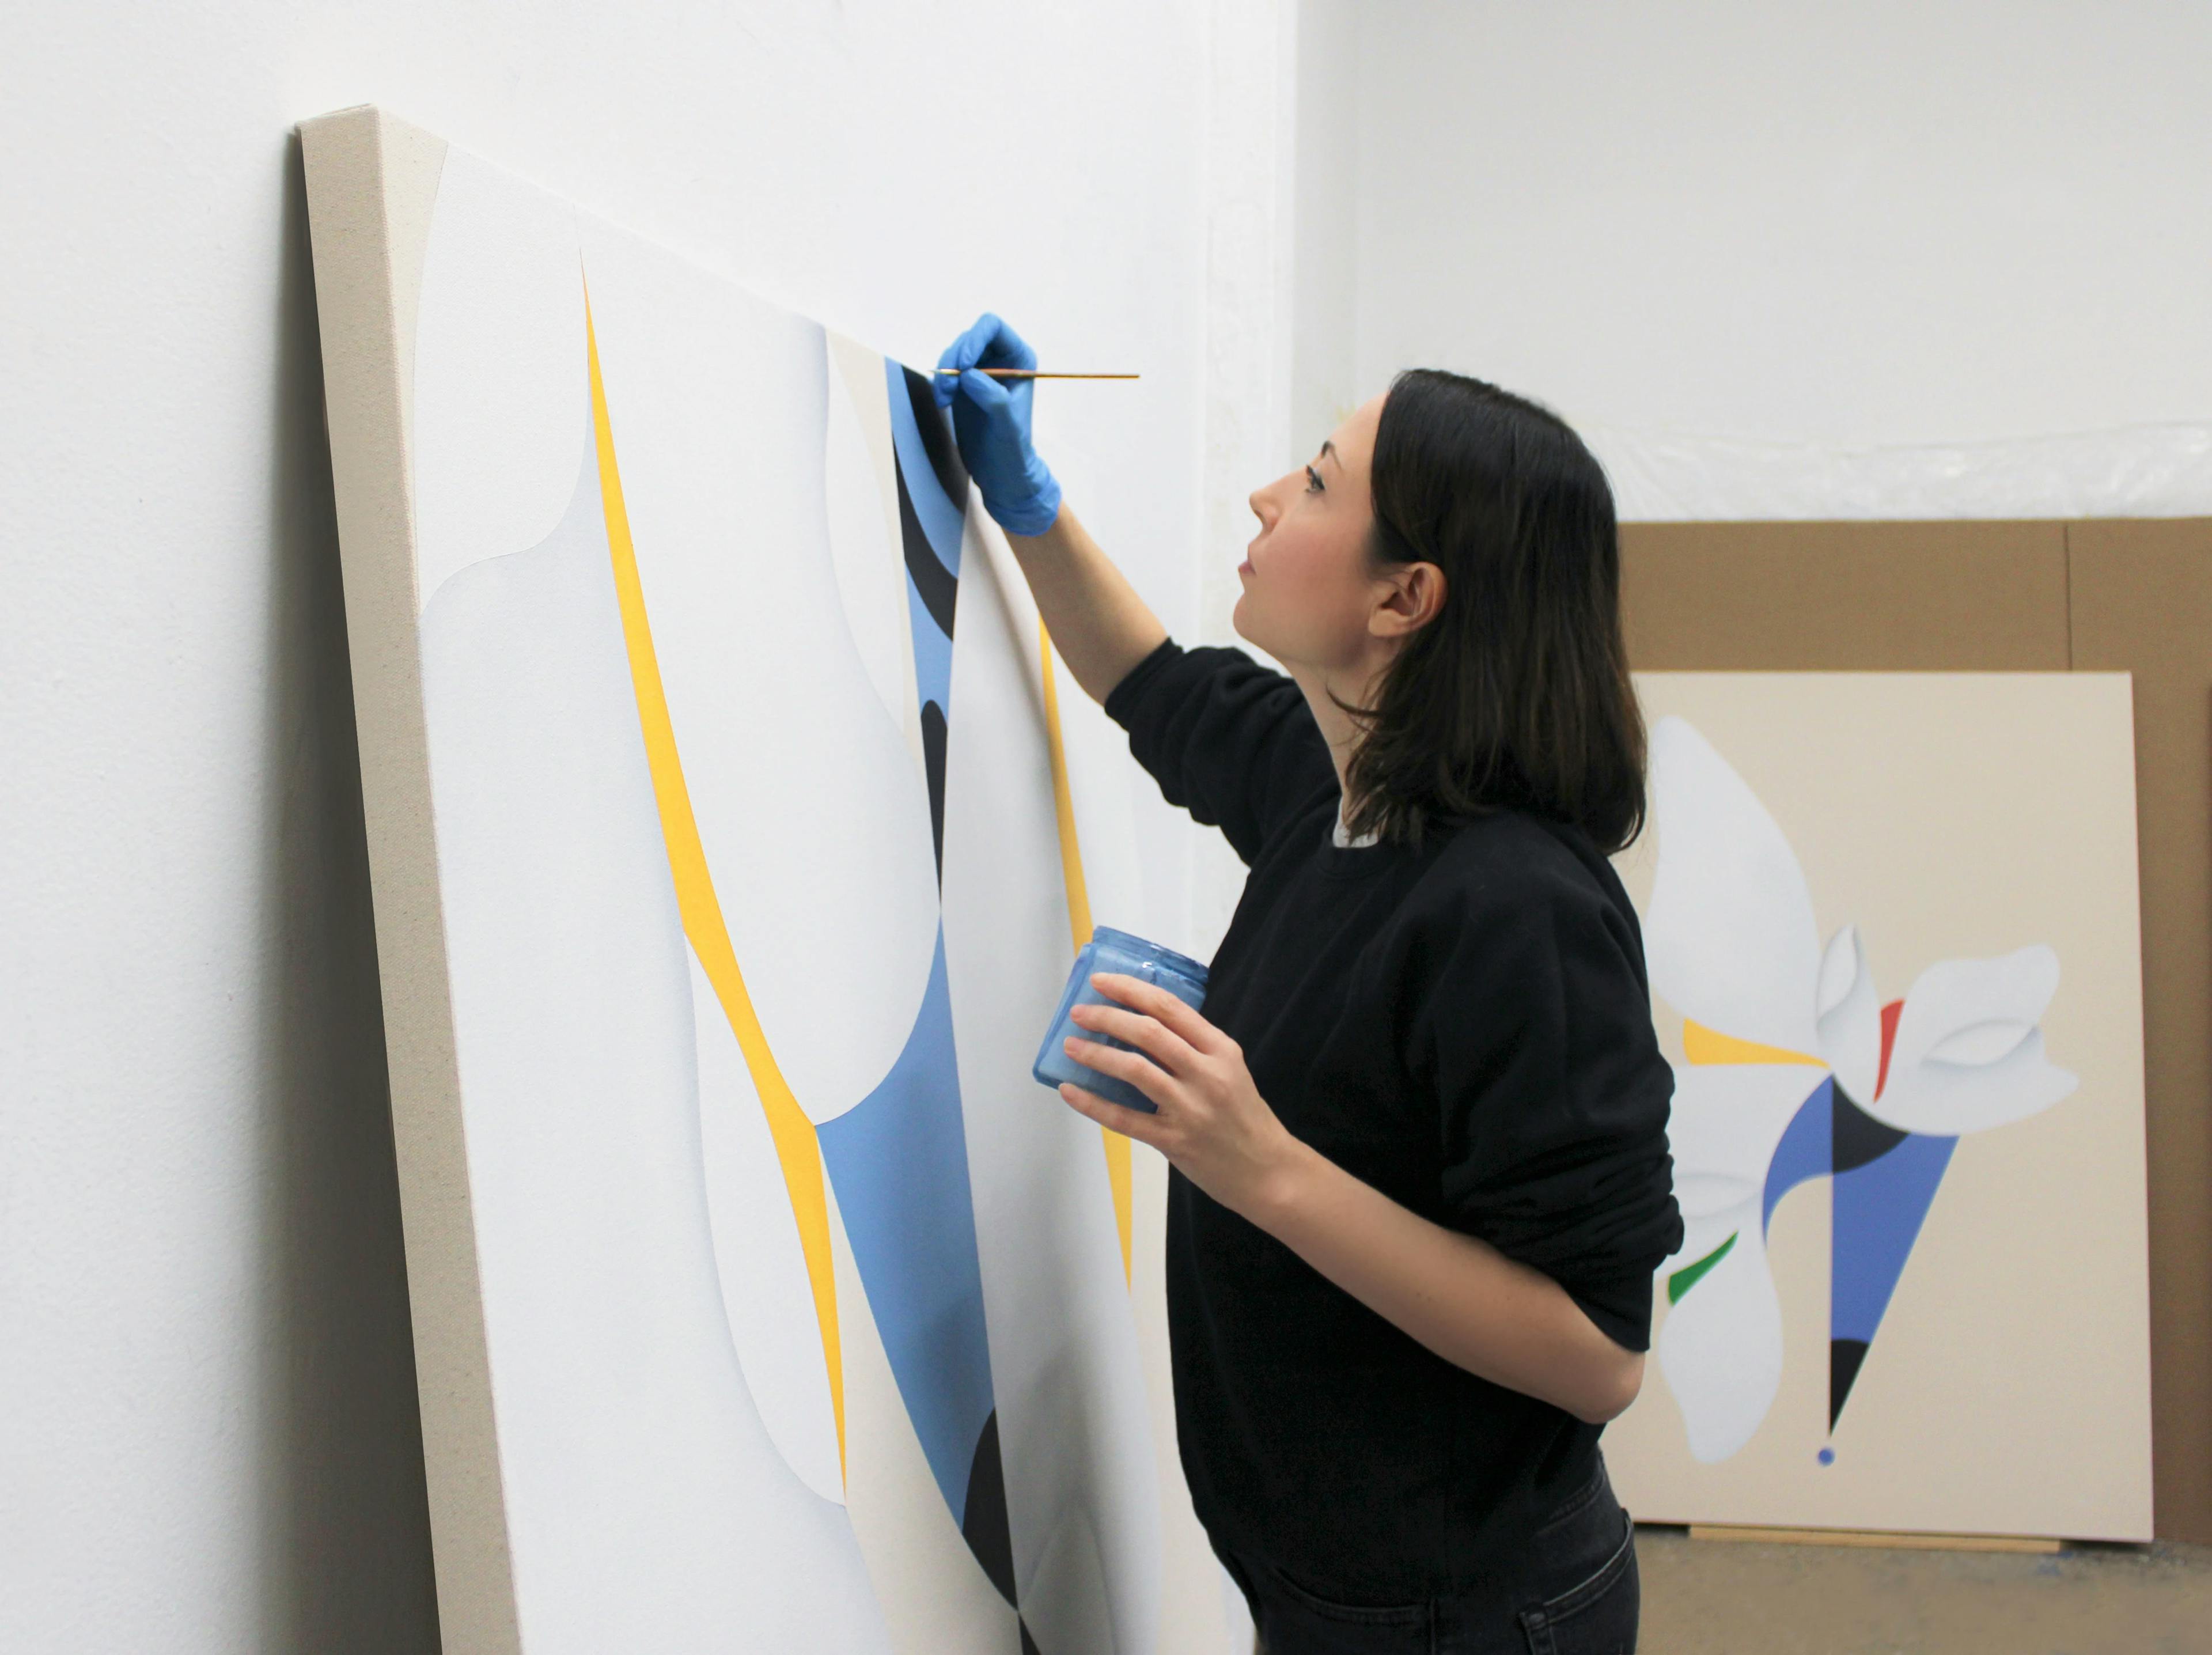 Artist Senem Oezdogan holding a small can of light blue paint and painting a large canvas in her studio.